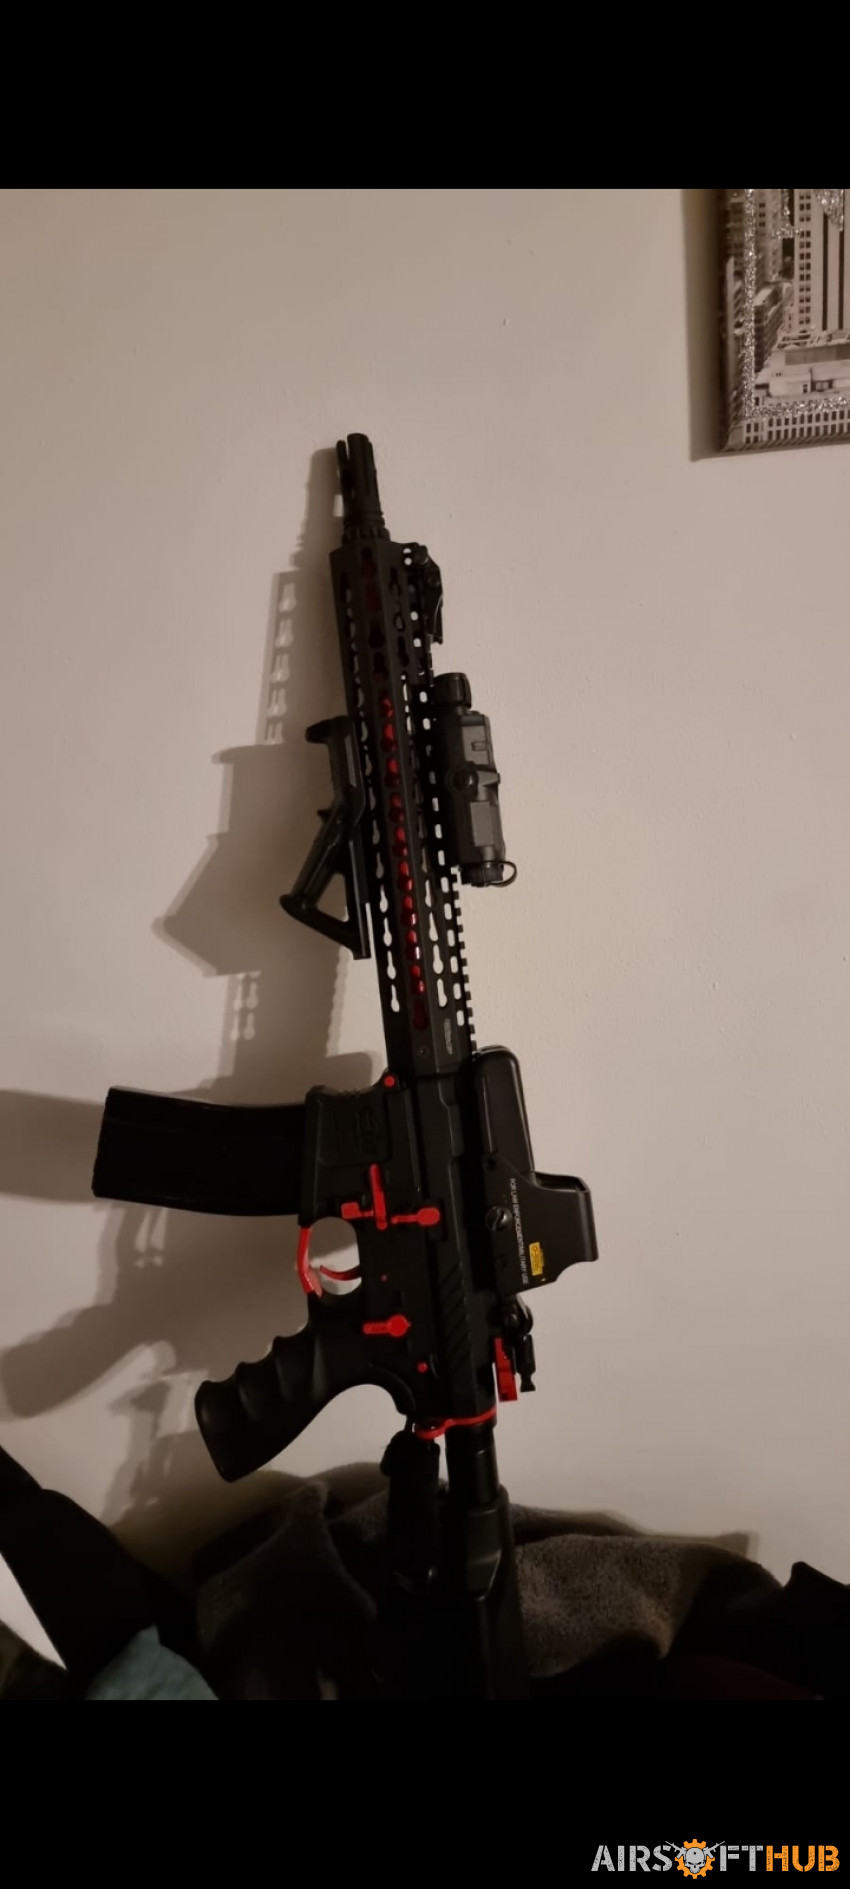 Cm16 srxl red edition - Used airsoft equipment